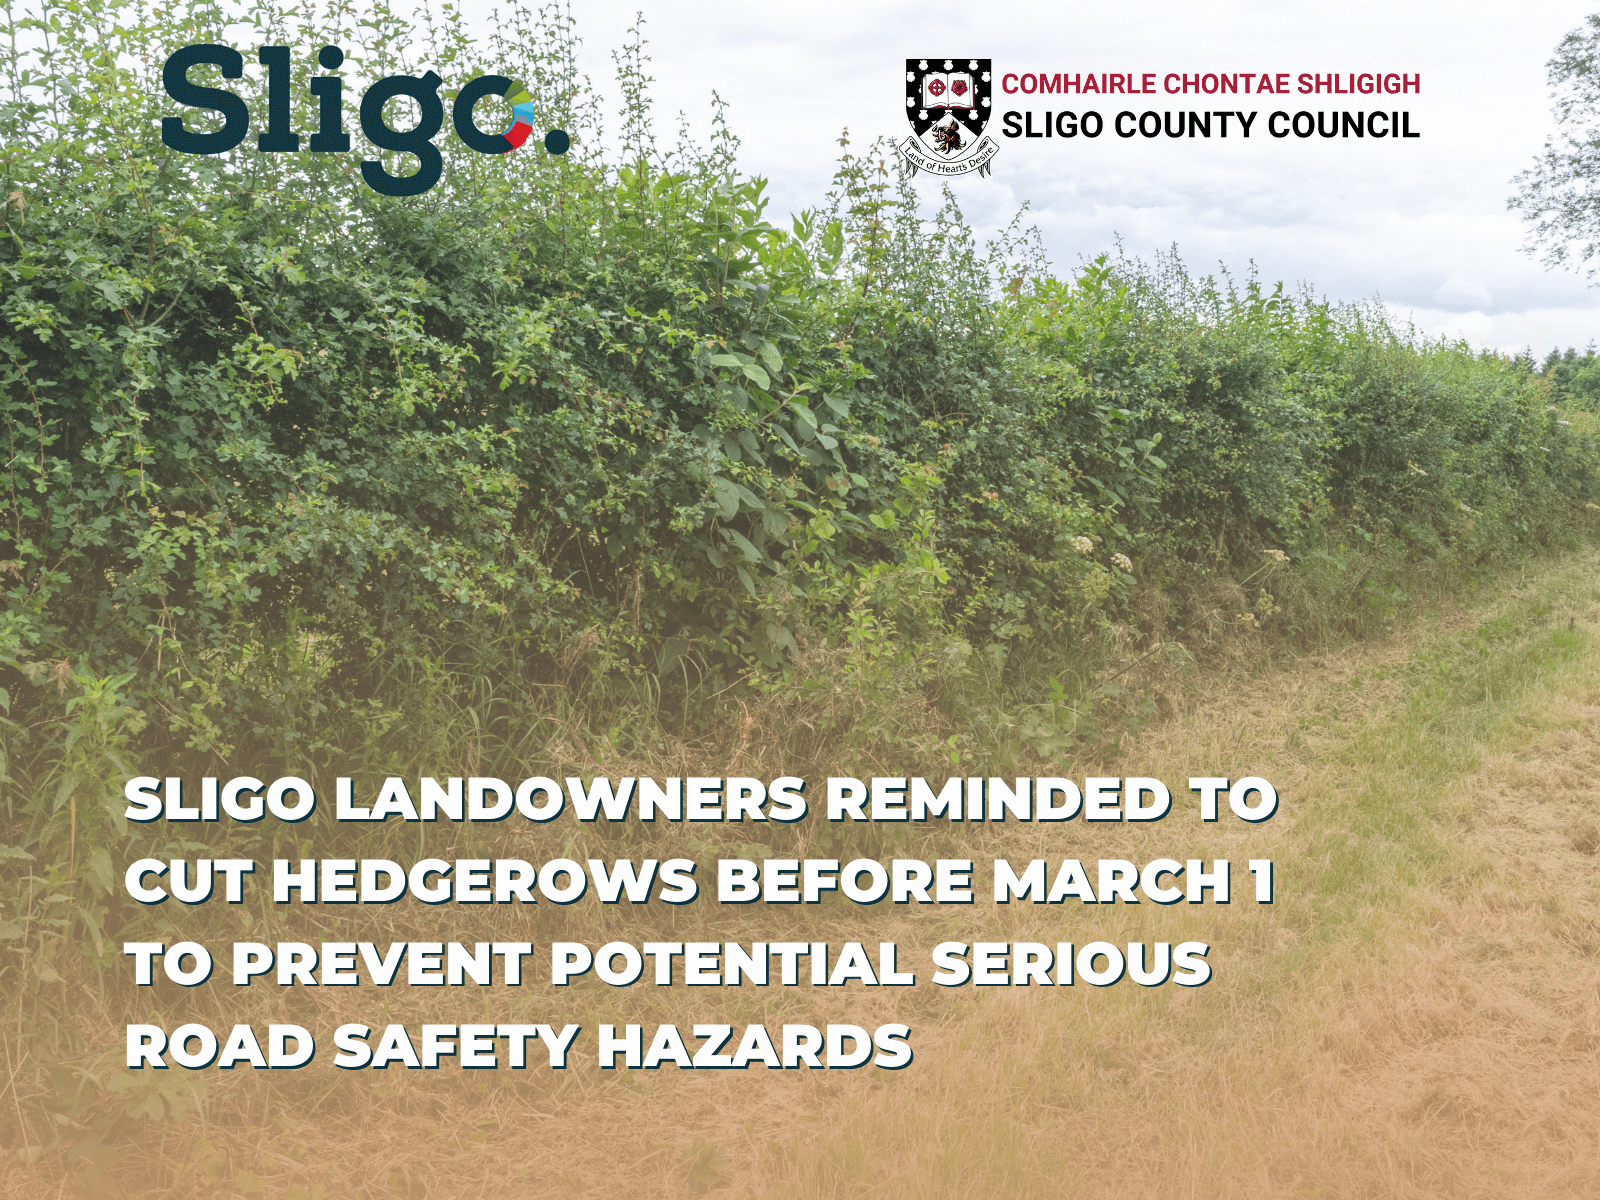 Sligo landowners reminded to cut hedgerows before March 1 to prevent potential serious road safety hazards